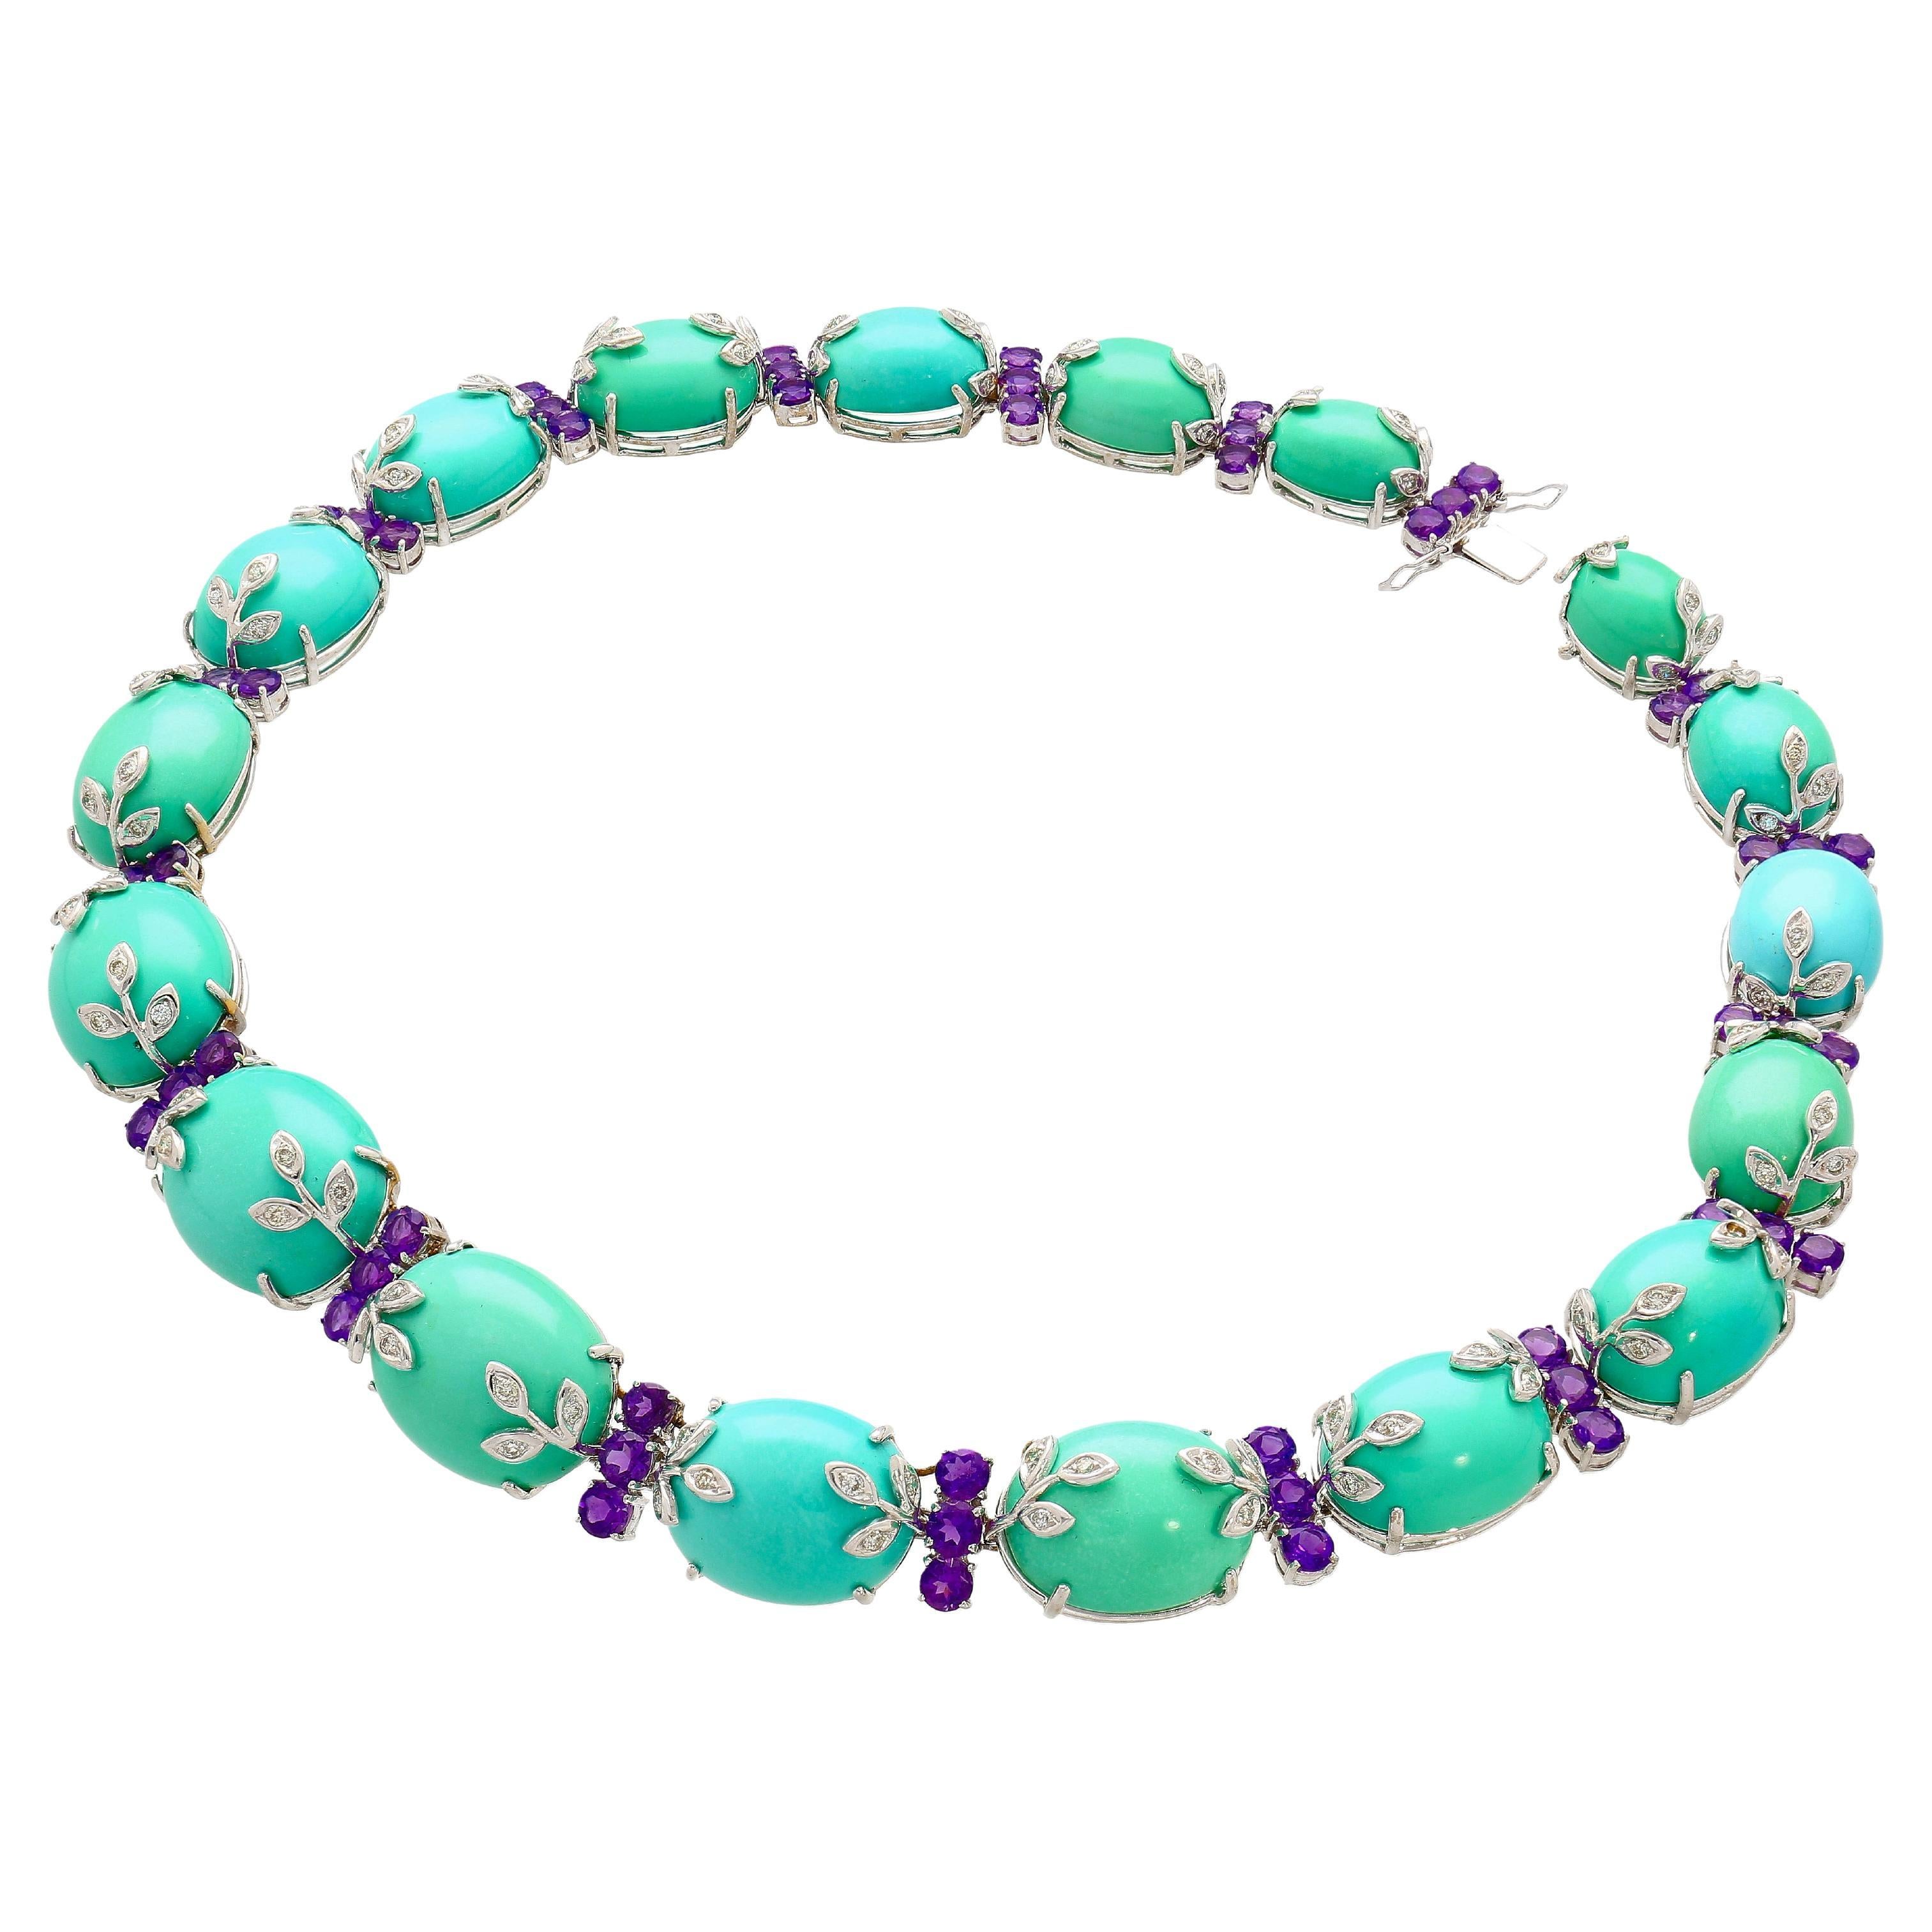 18K White Gold Turquoise and Amethyst Choker Necklace